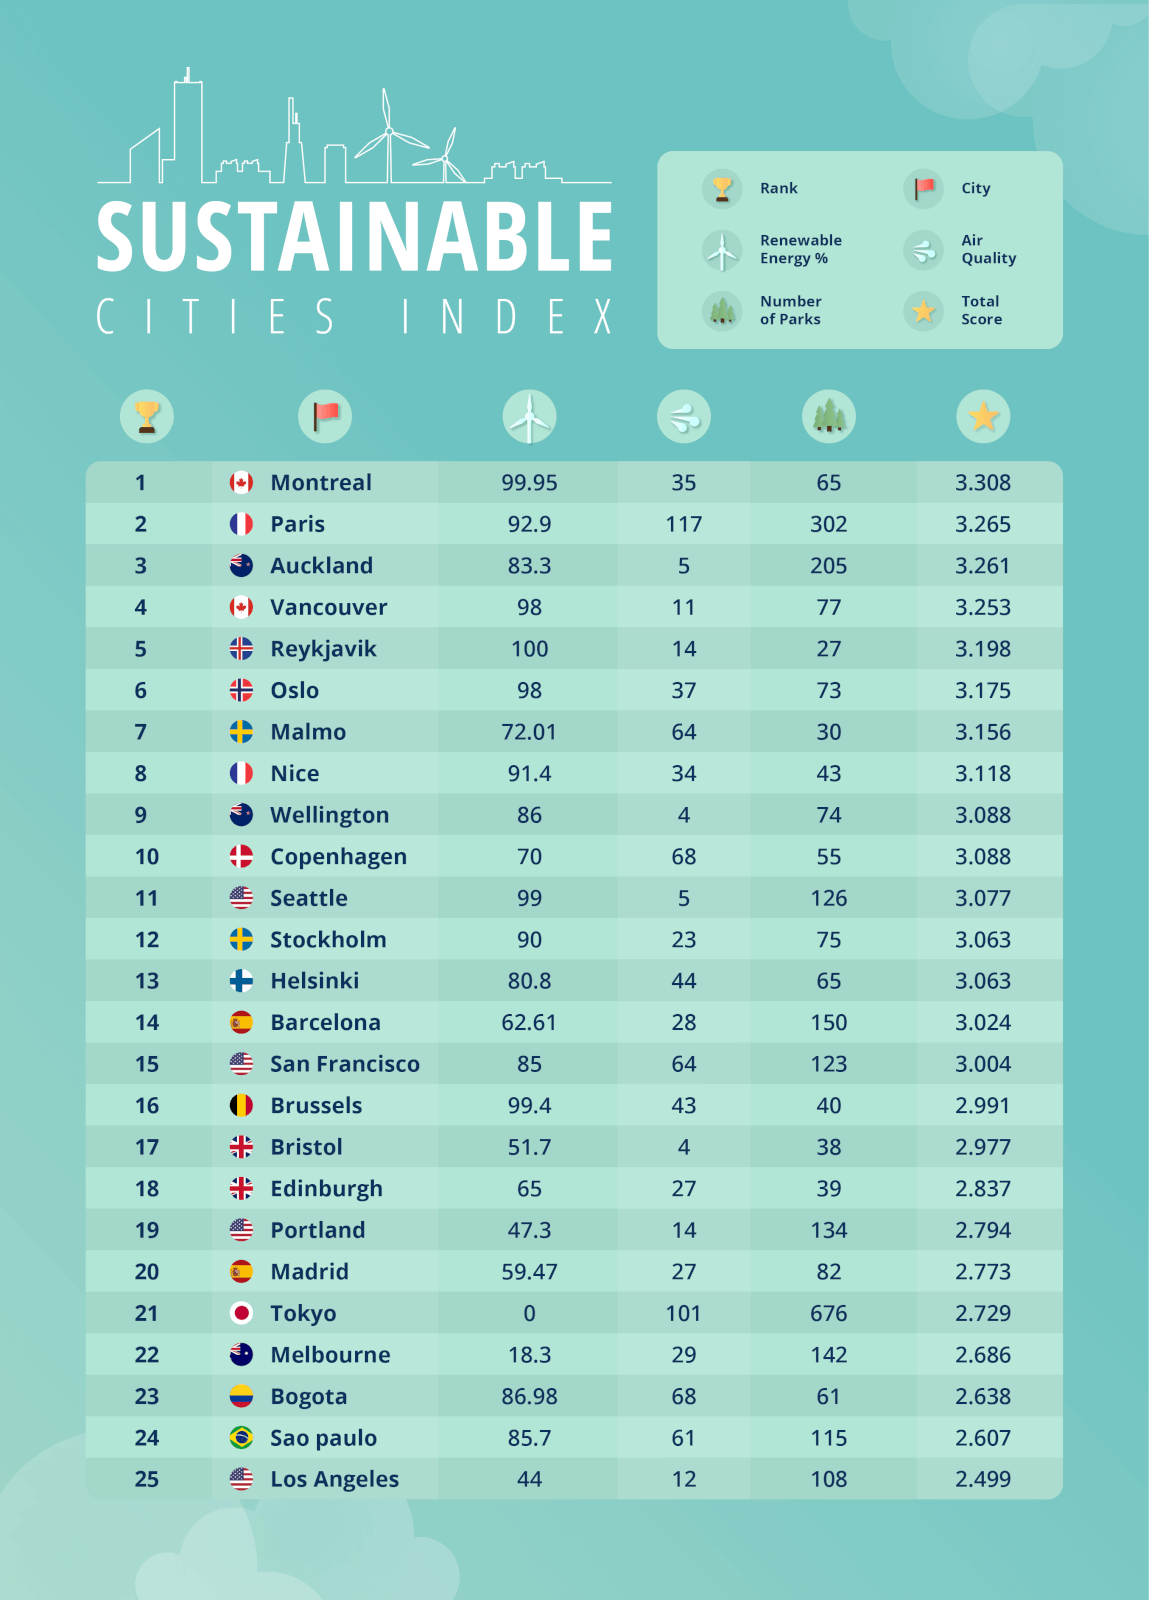 Indexed table of the top 25 sustainable cities across the world